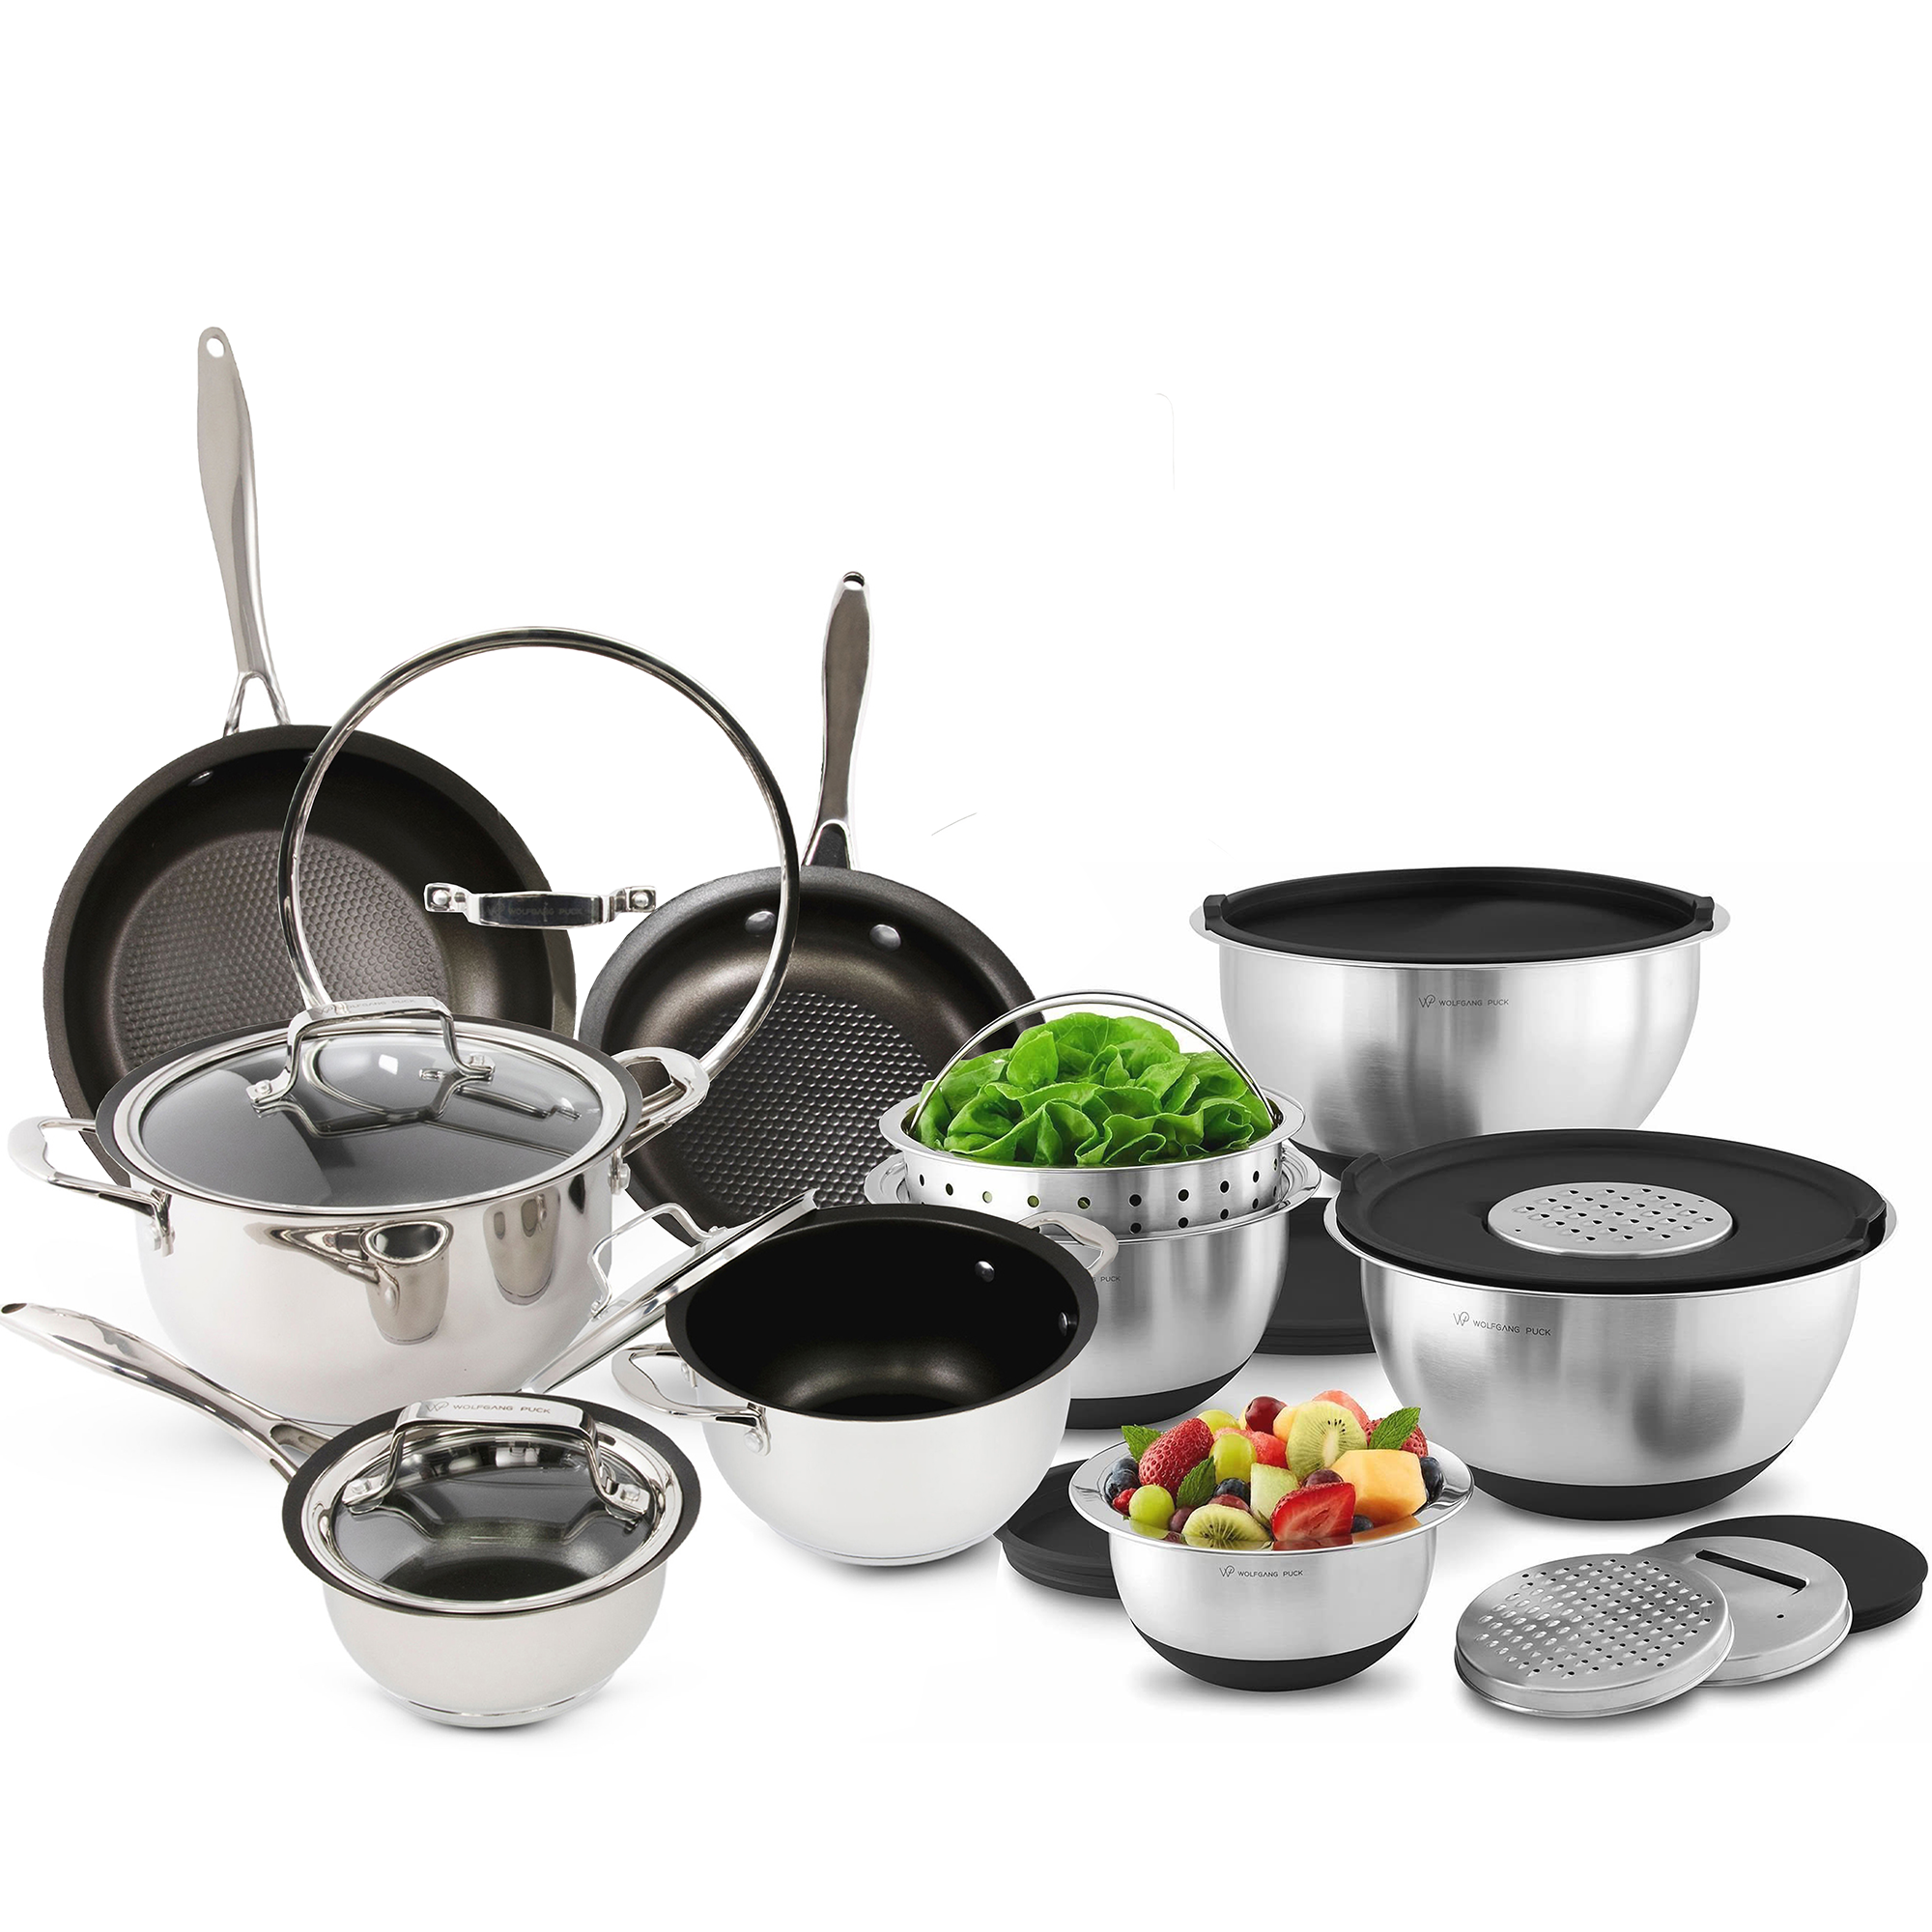 21-Piece Stainless Steel Cookware and Mixing Bowls Set